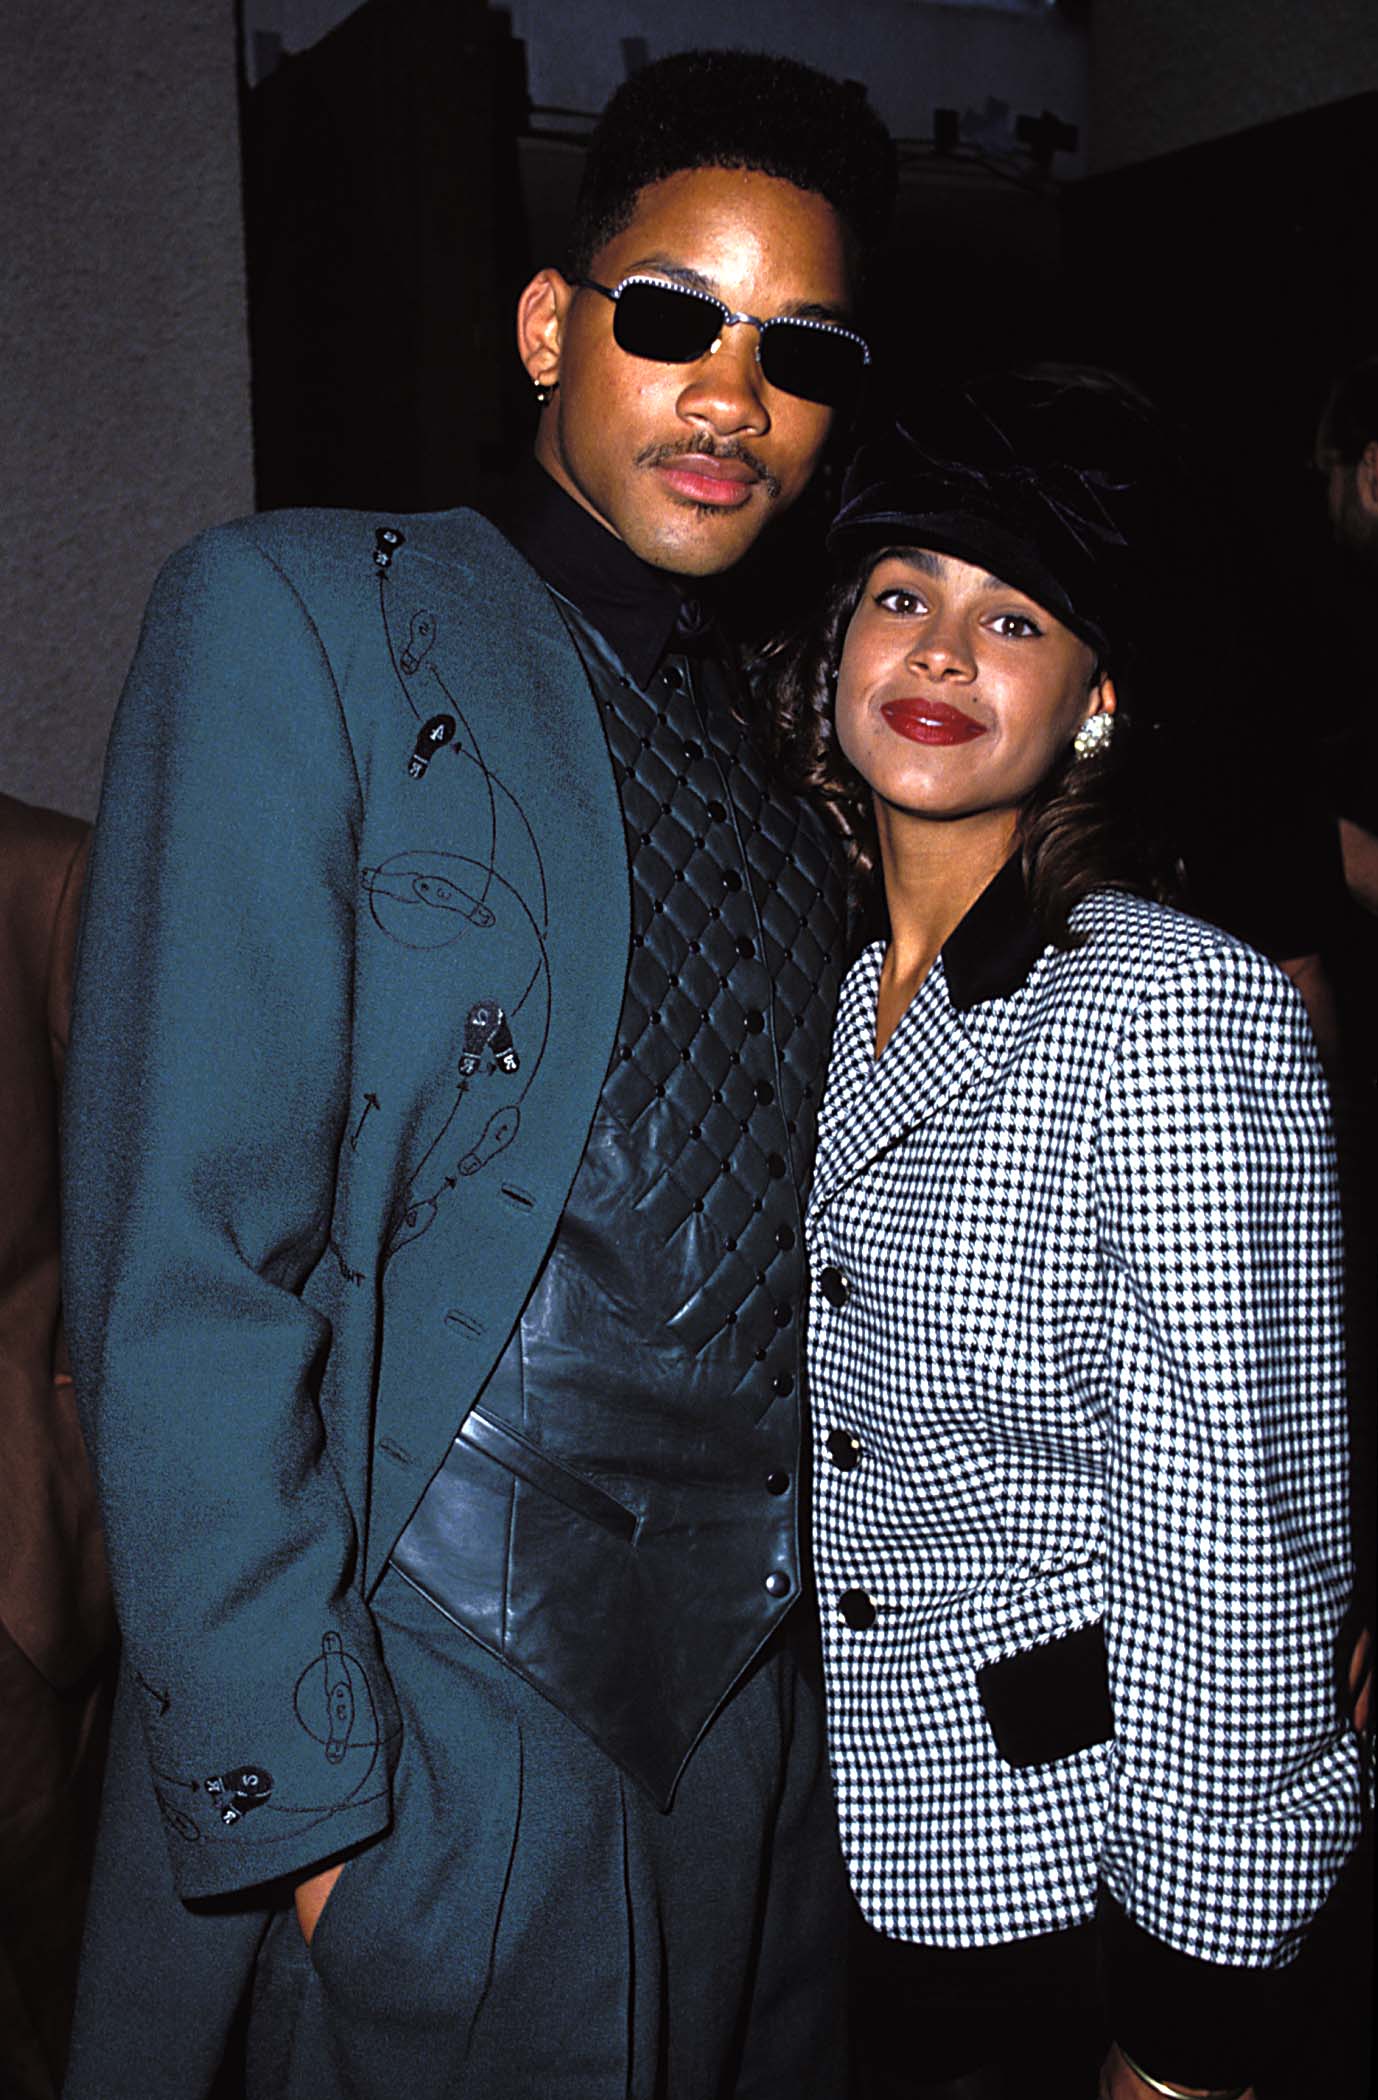 Will Smith and Sheree Zampino at the 1991 MTV Video Music Awards at in Los Angeles, California | Source: Getty Images